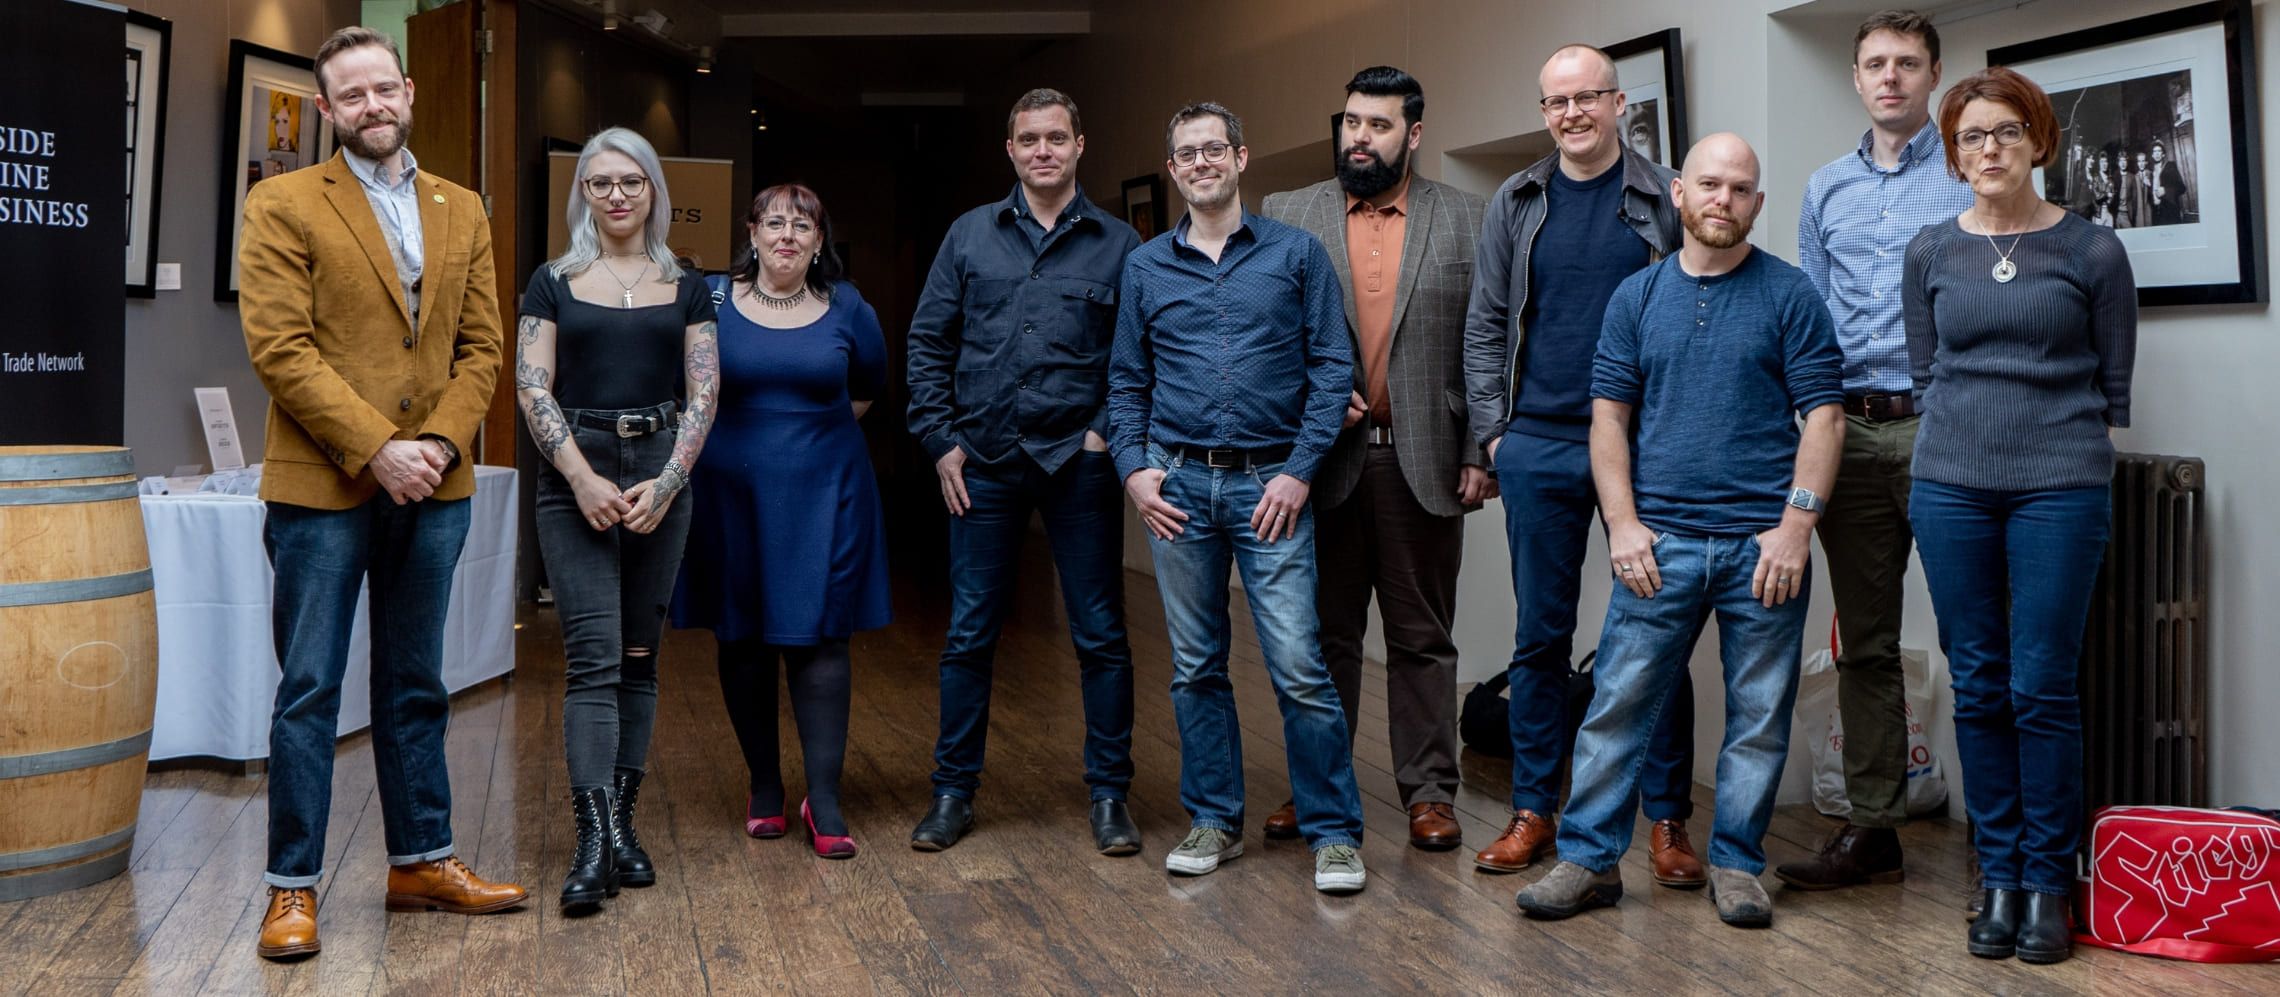 Photo for: 2019 London Beer Competition Judges